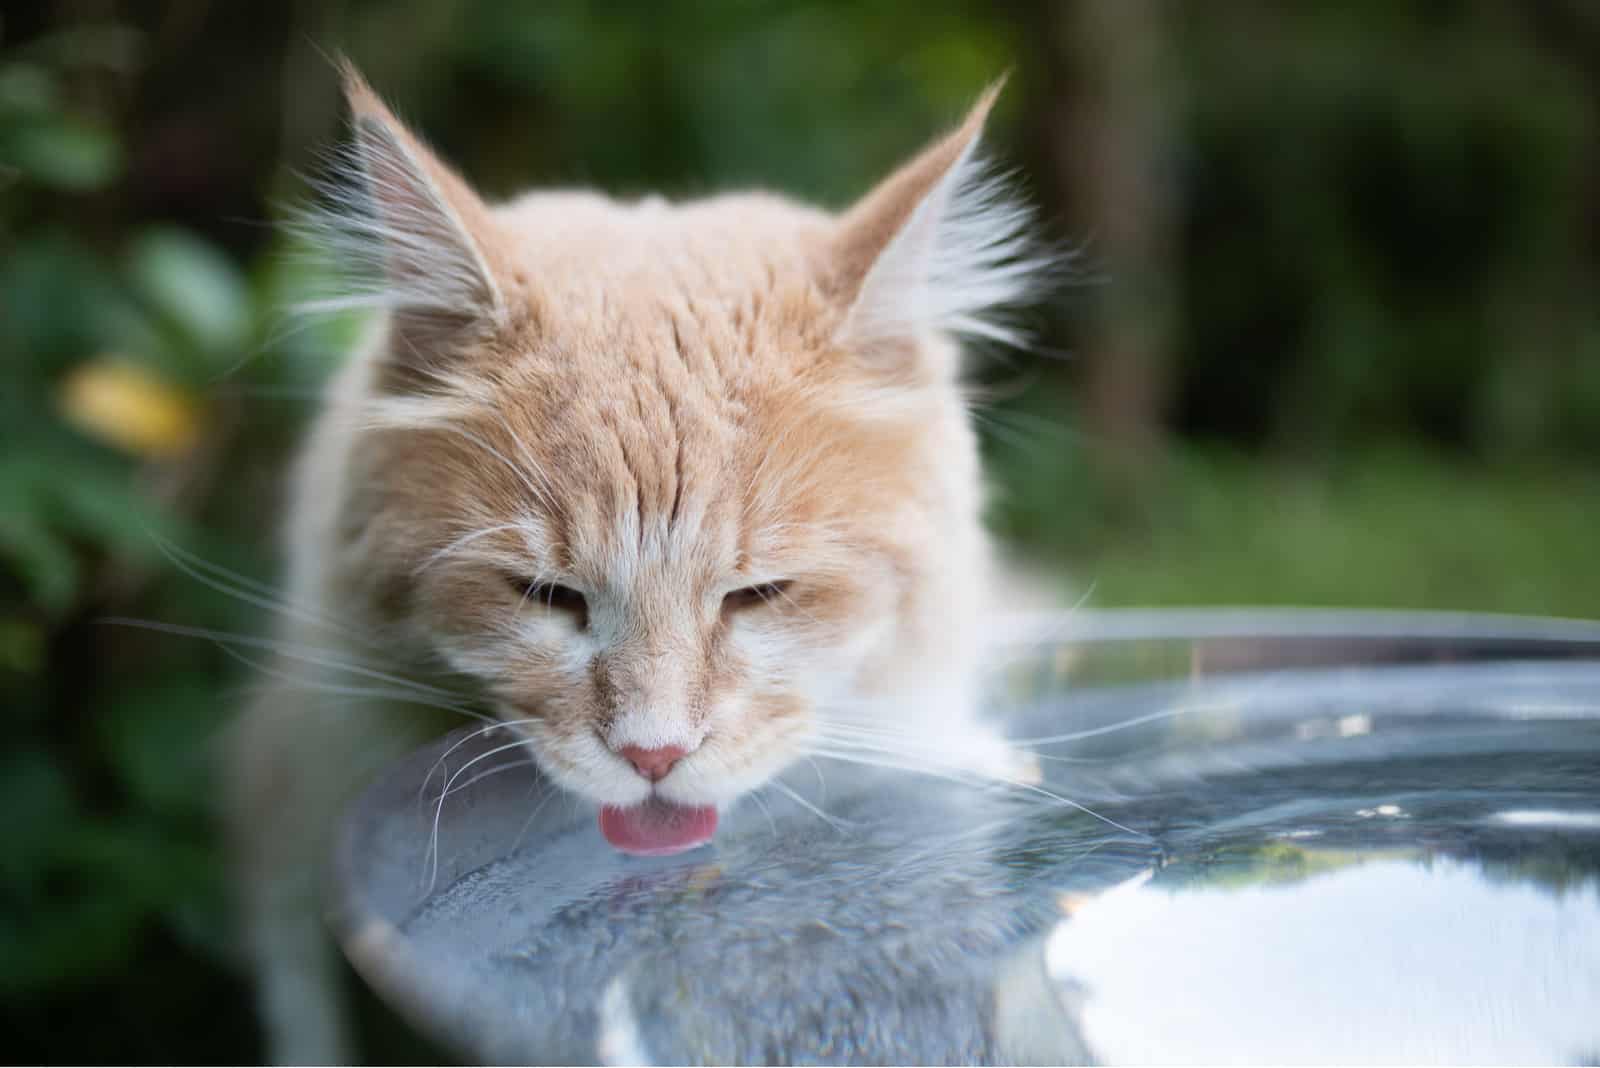 cat drinking water from a bucket